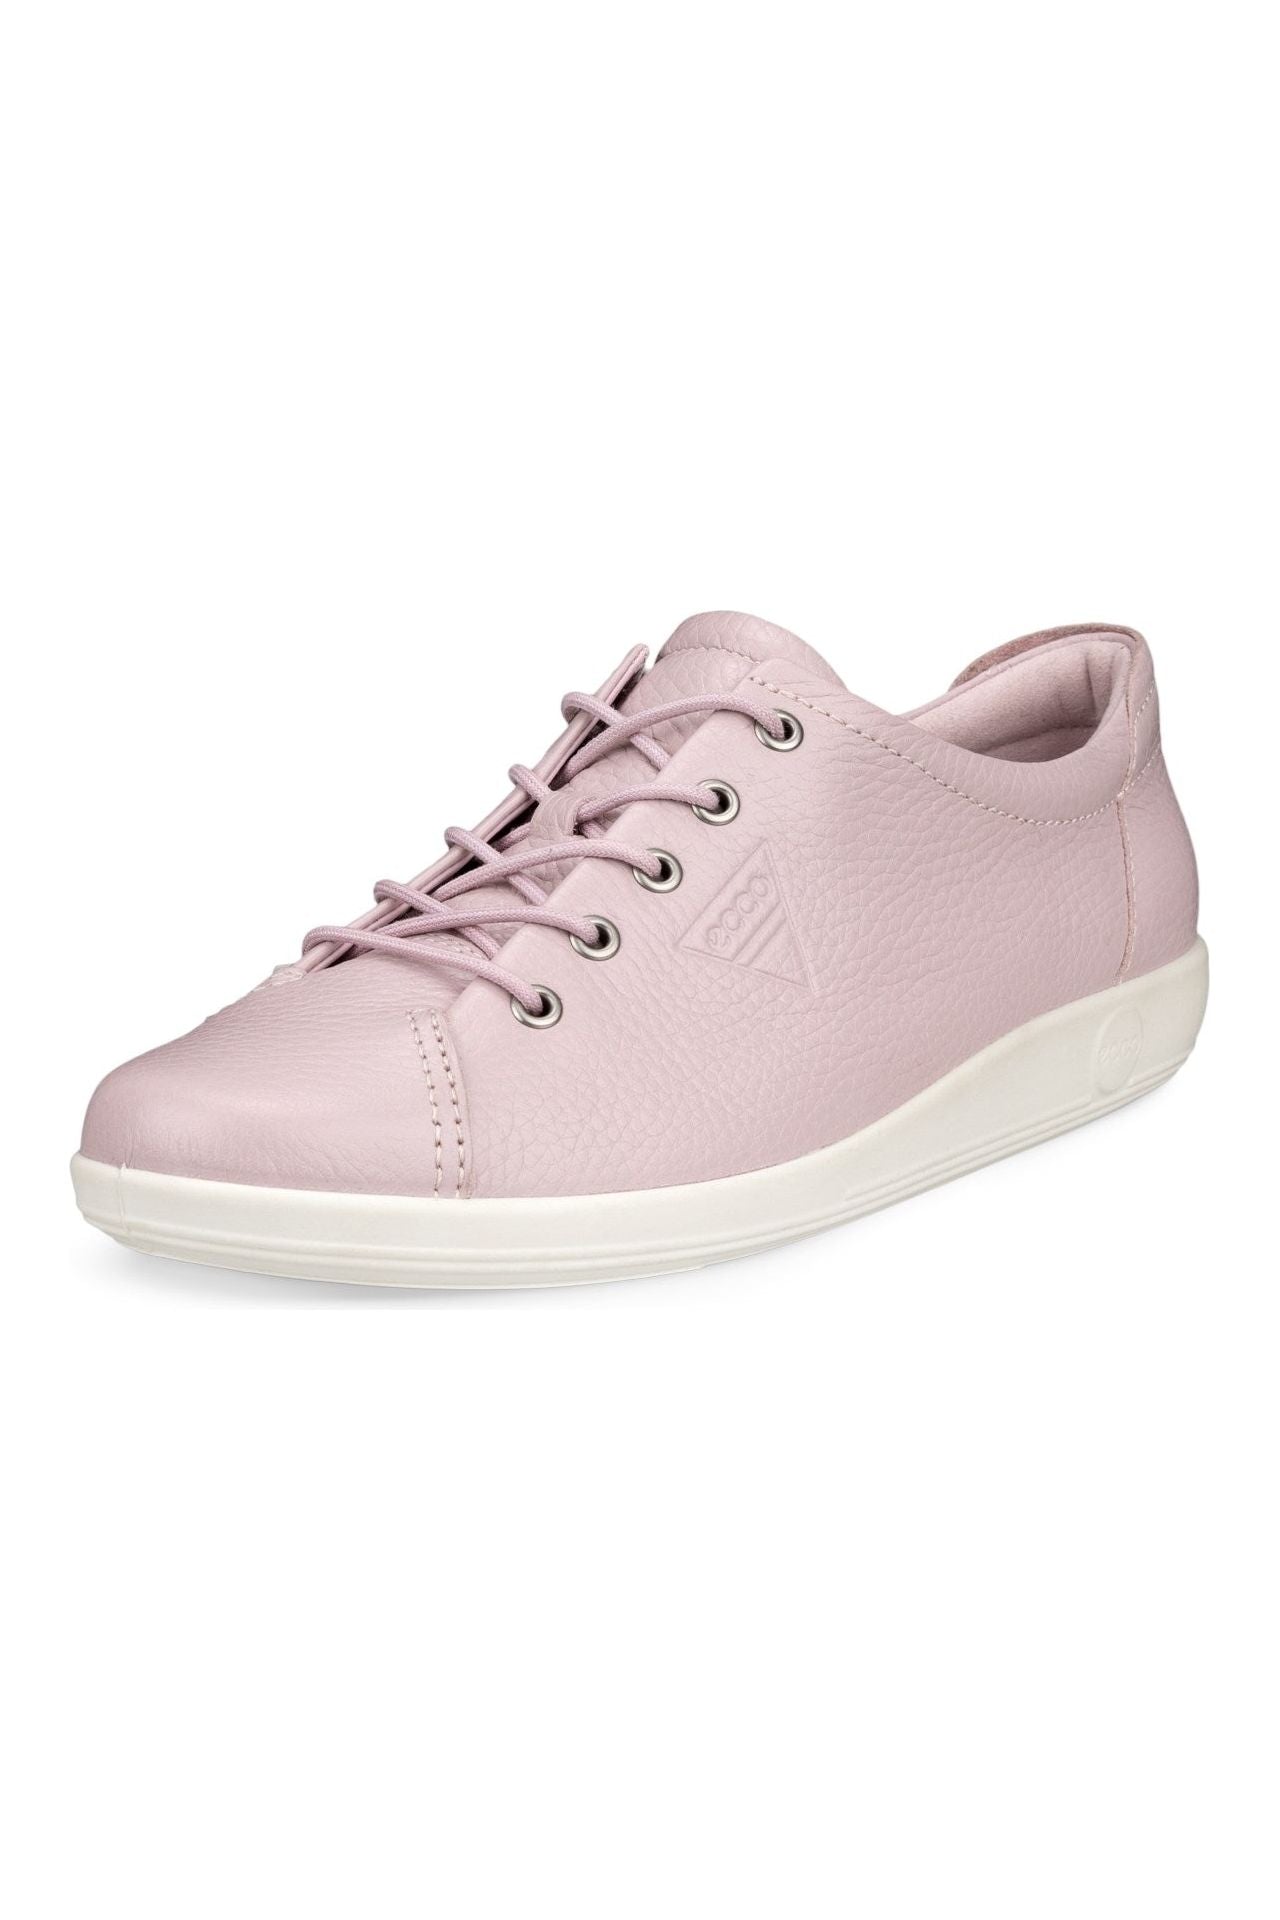 ECCO Soft 2.0 206503-01405  in pink leather